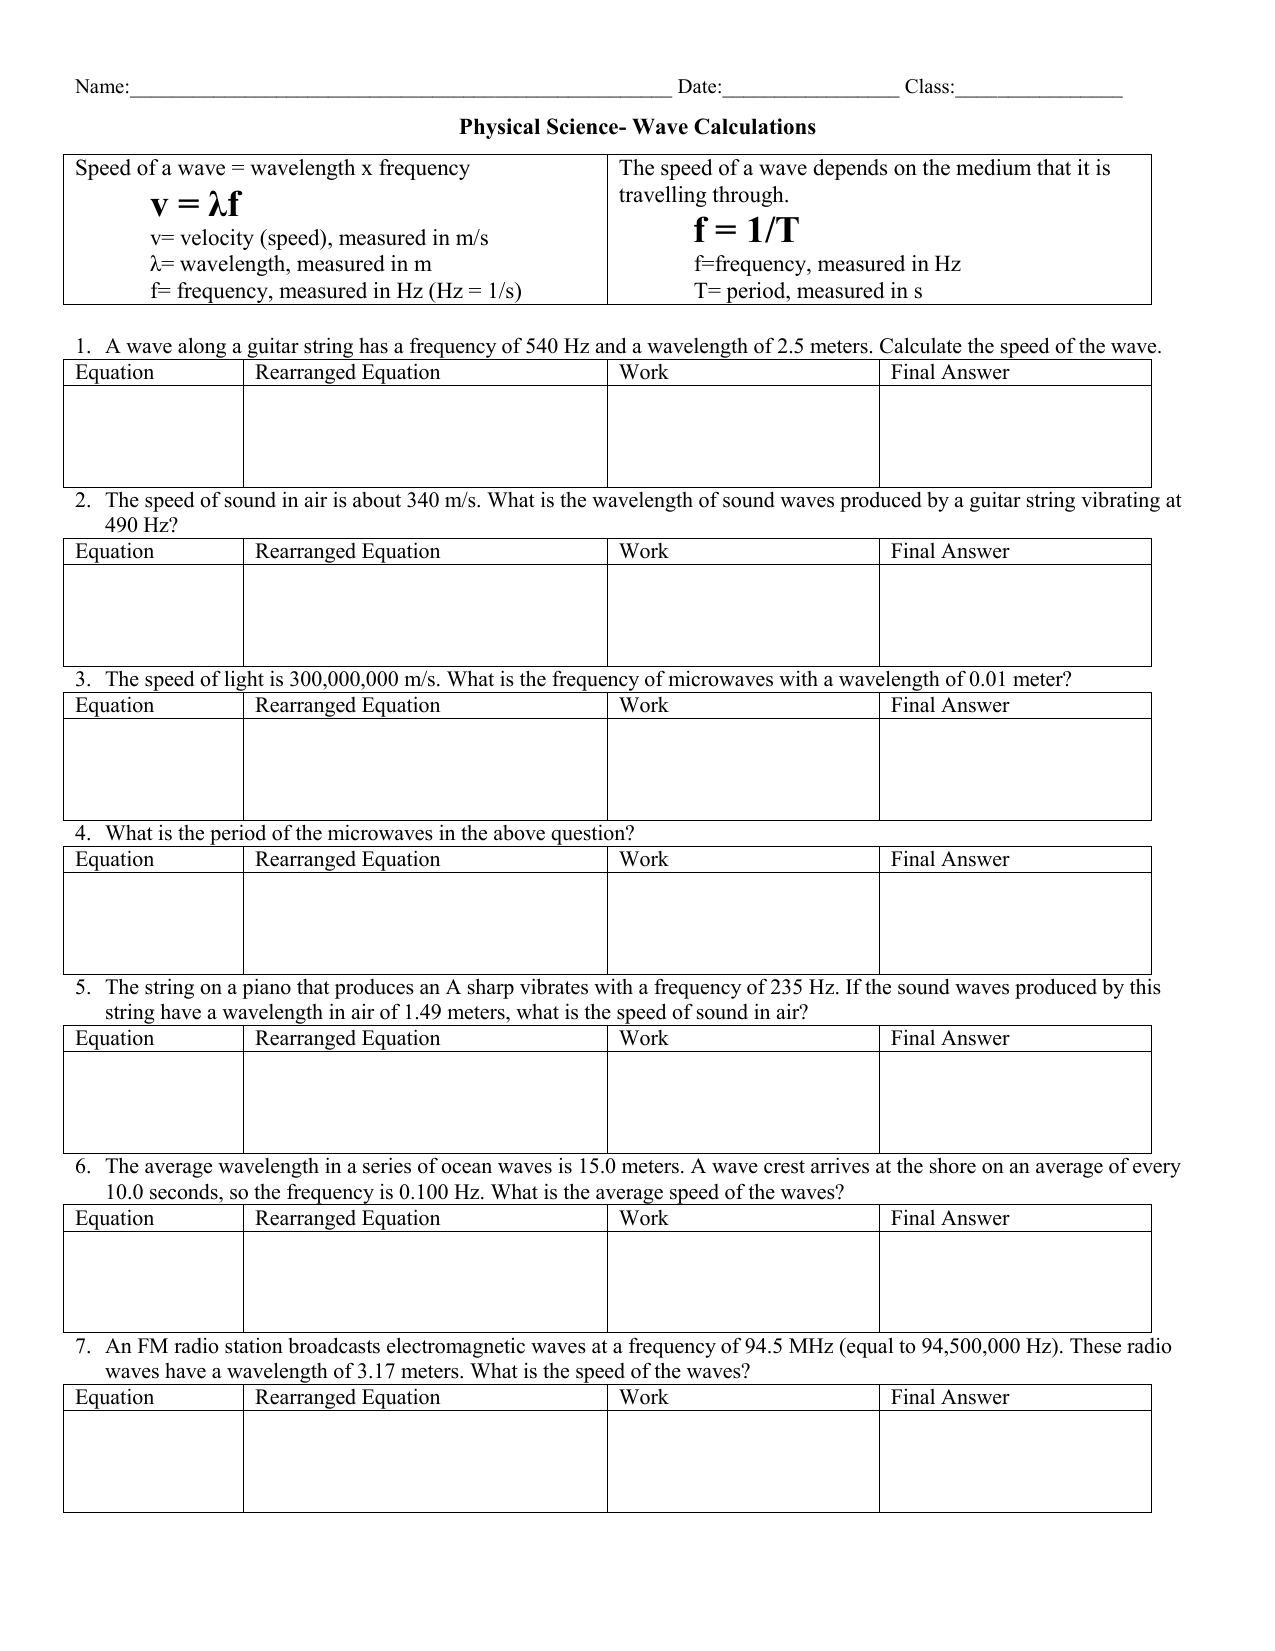 Wave Calculations Worksheet 1213 As Well As Wave Equation Worksheet Answer Key